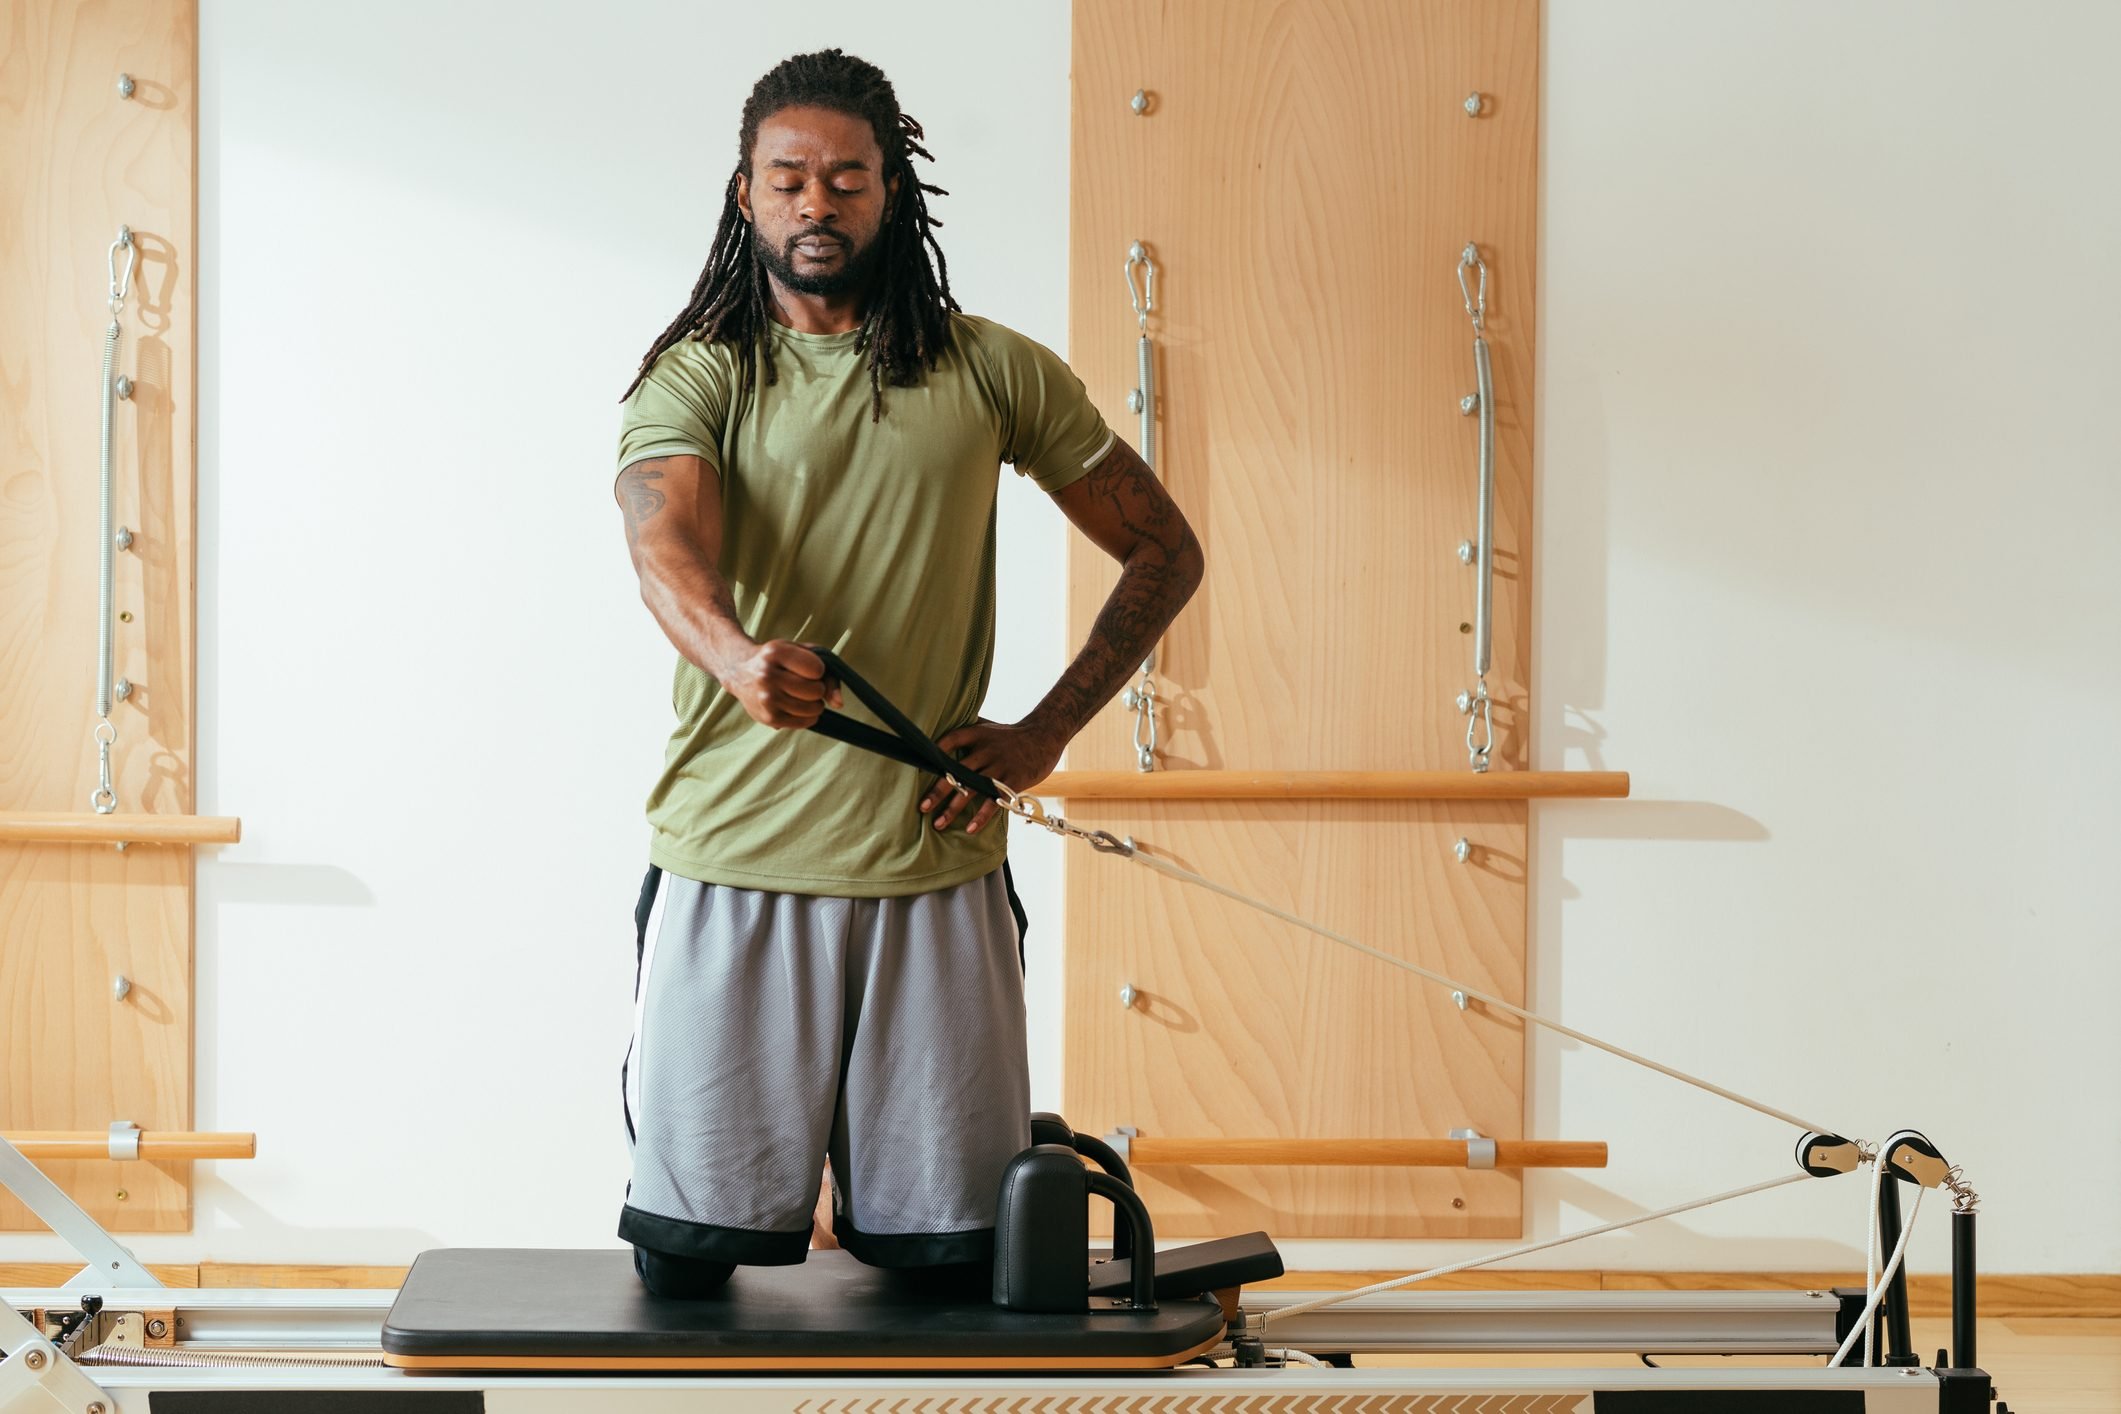 What's a Pilates Machine and How do You Use One?